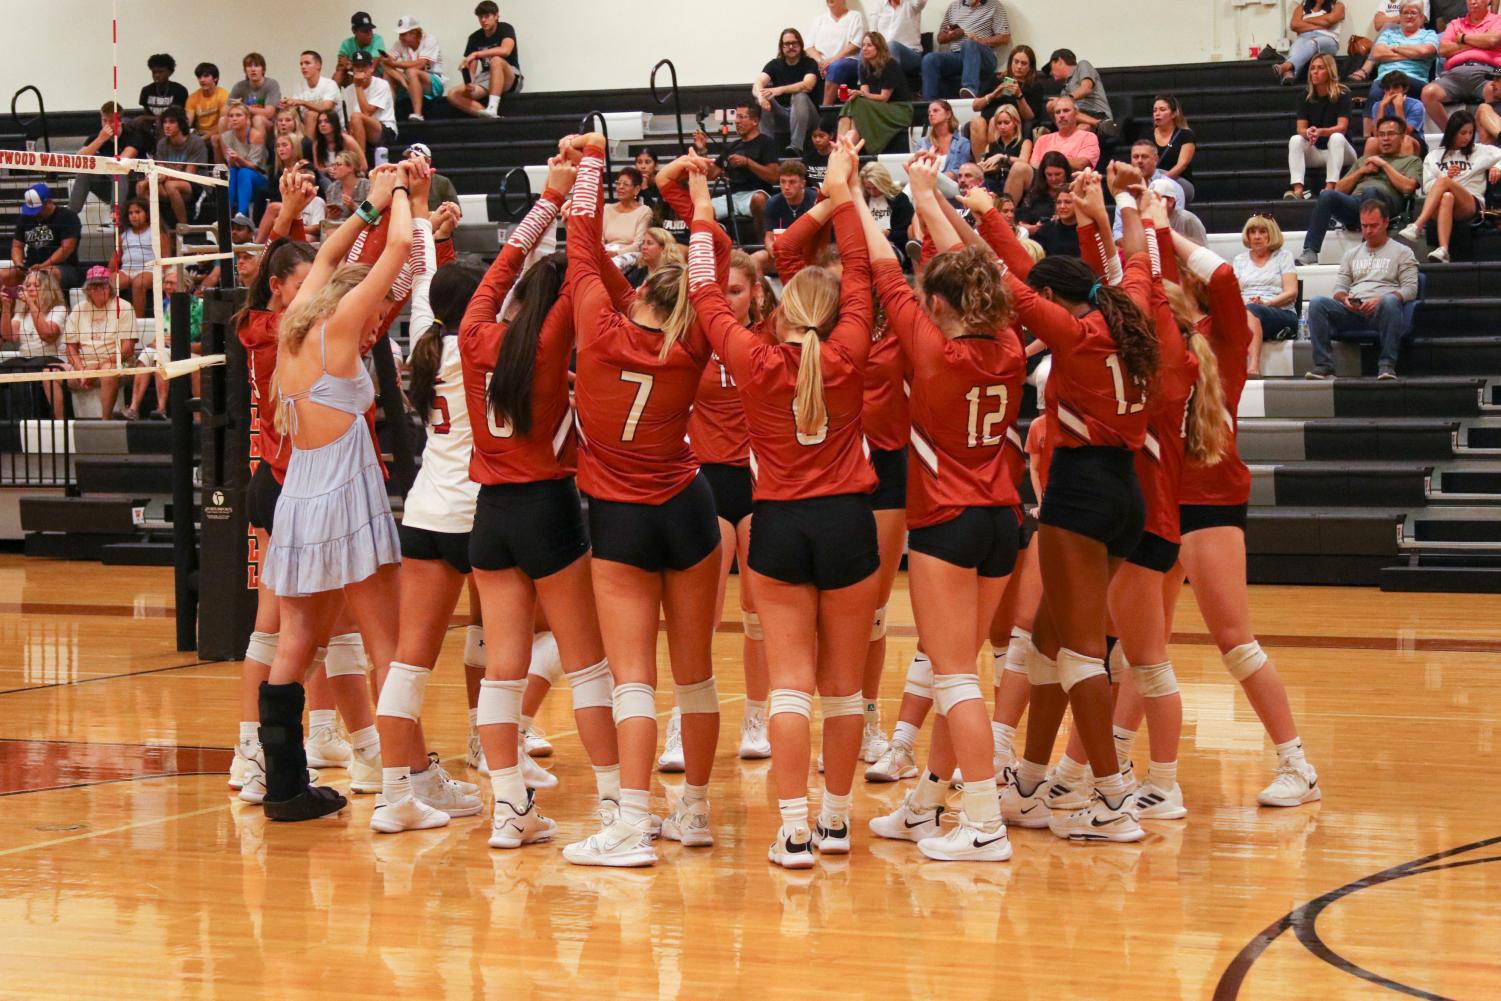 Varsity+Volleyball+Claims+Victory+Over+Vipers+in+District+Opener